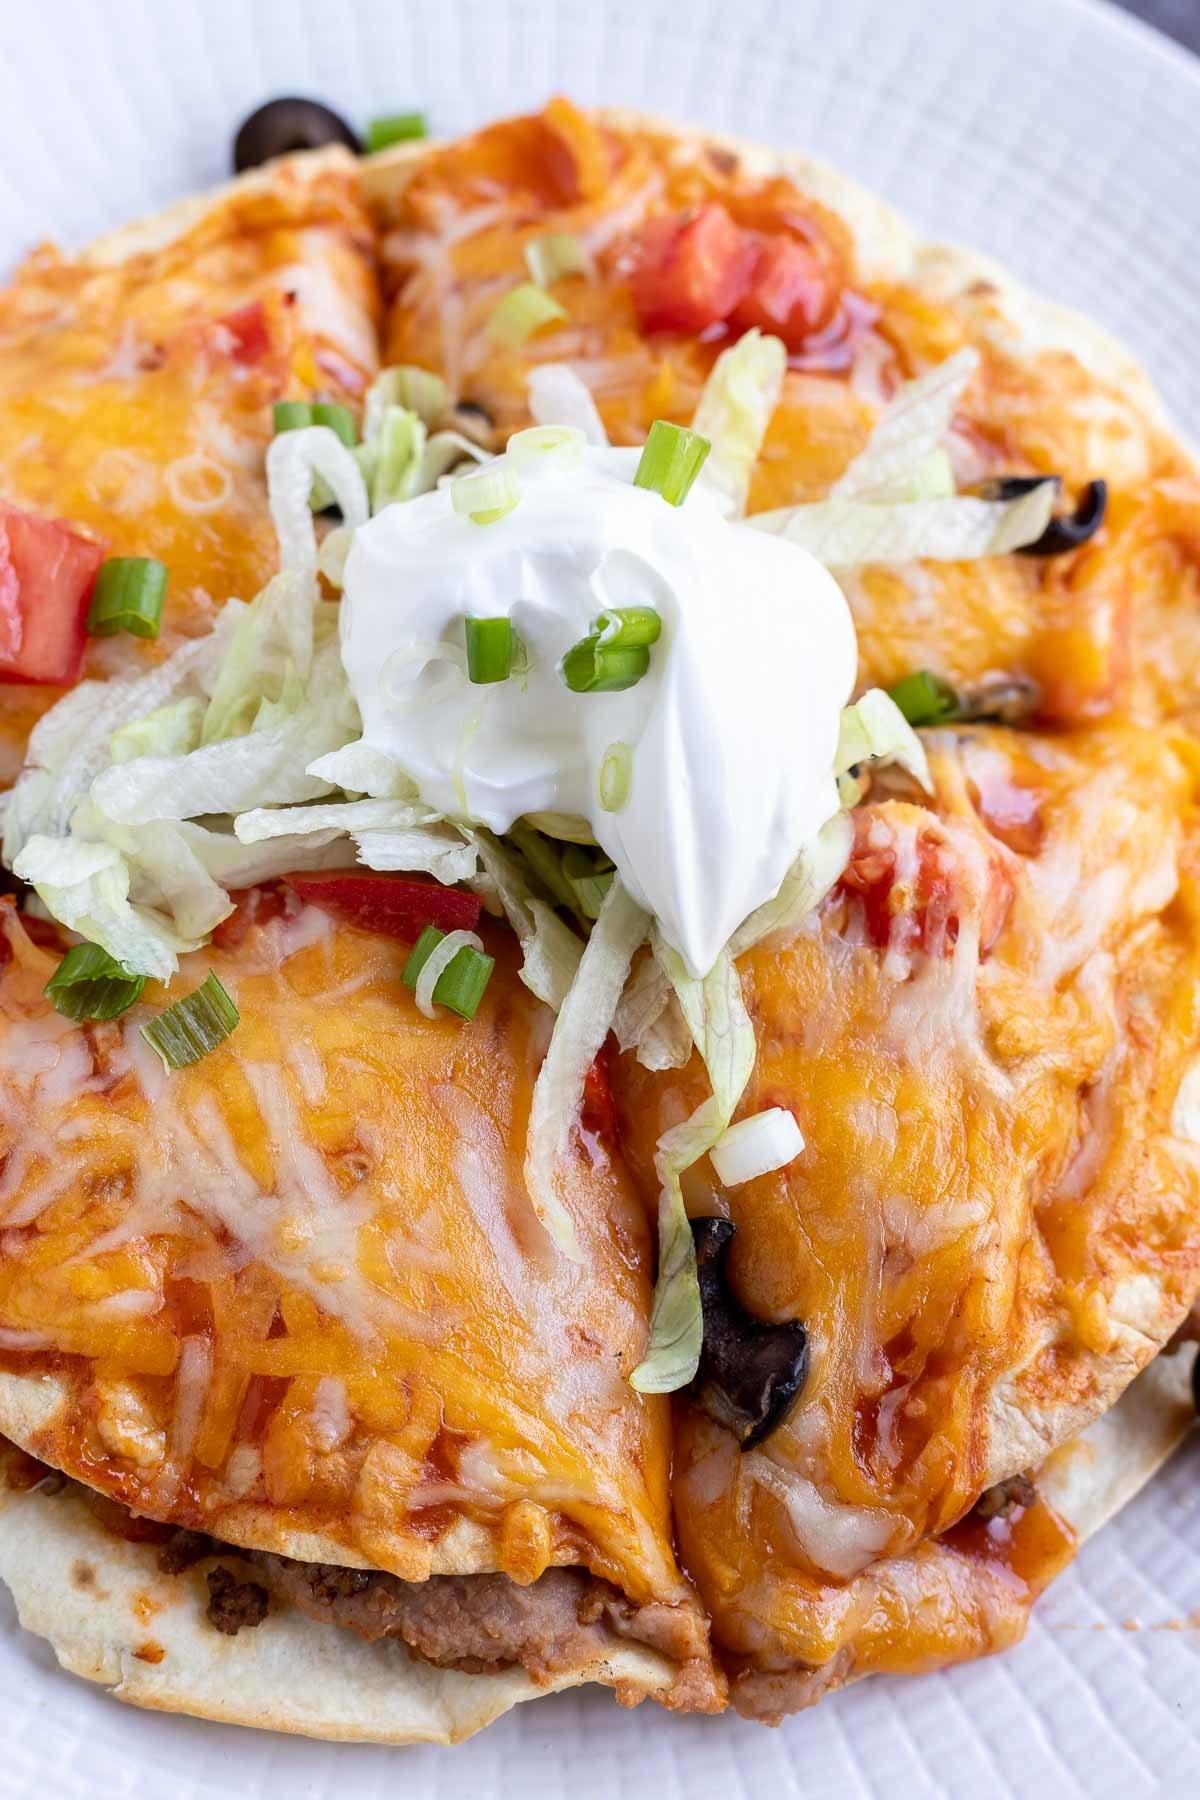 A Mexican pizza topped with refried beans, cheese, and sour cream.